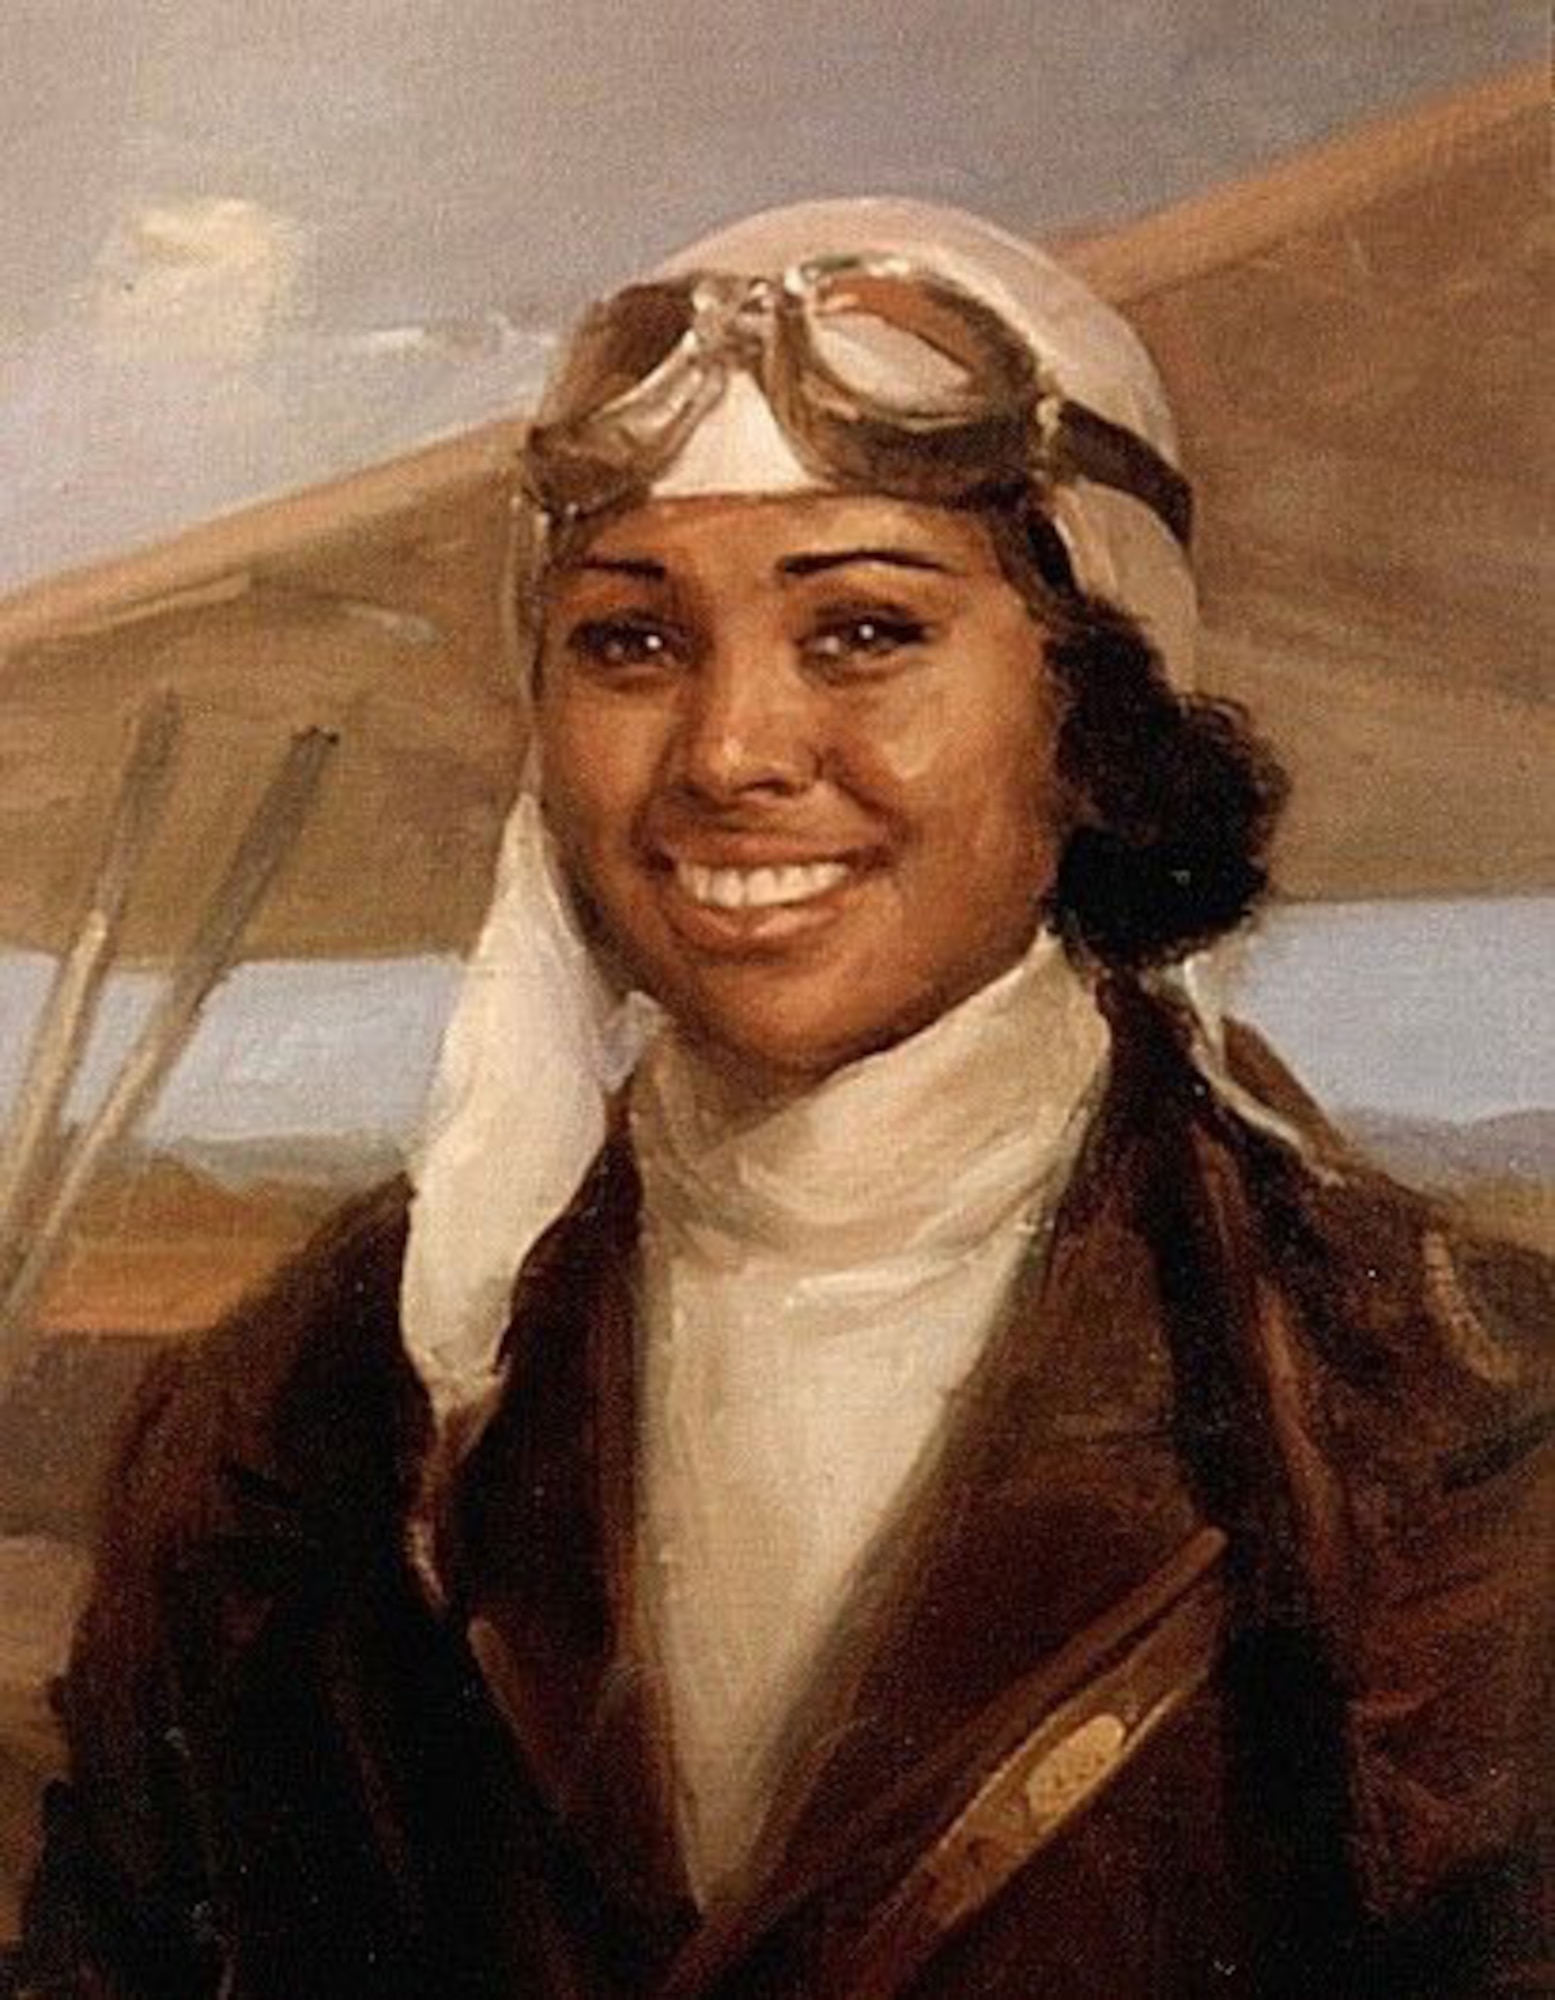 Bessie Coleman: After traveling to France to attend flight school, Coleman returned to U.S. to dazzle crowds with aerial prowess.